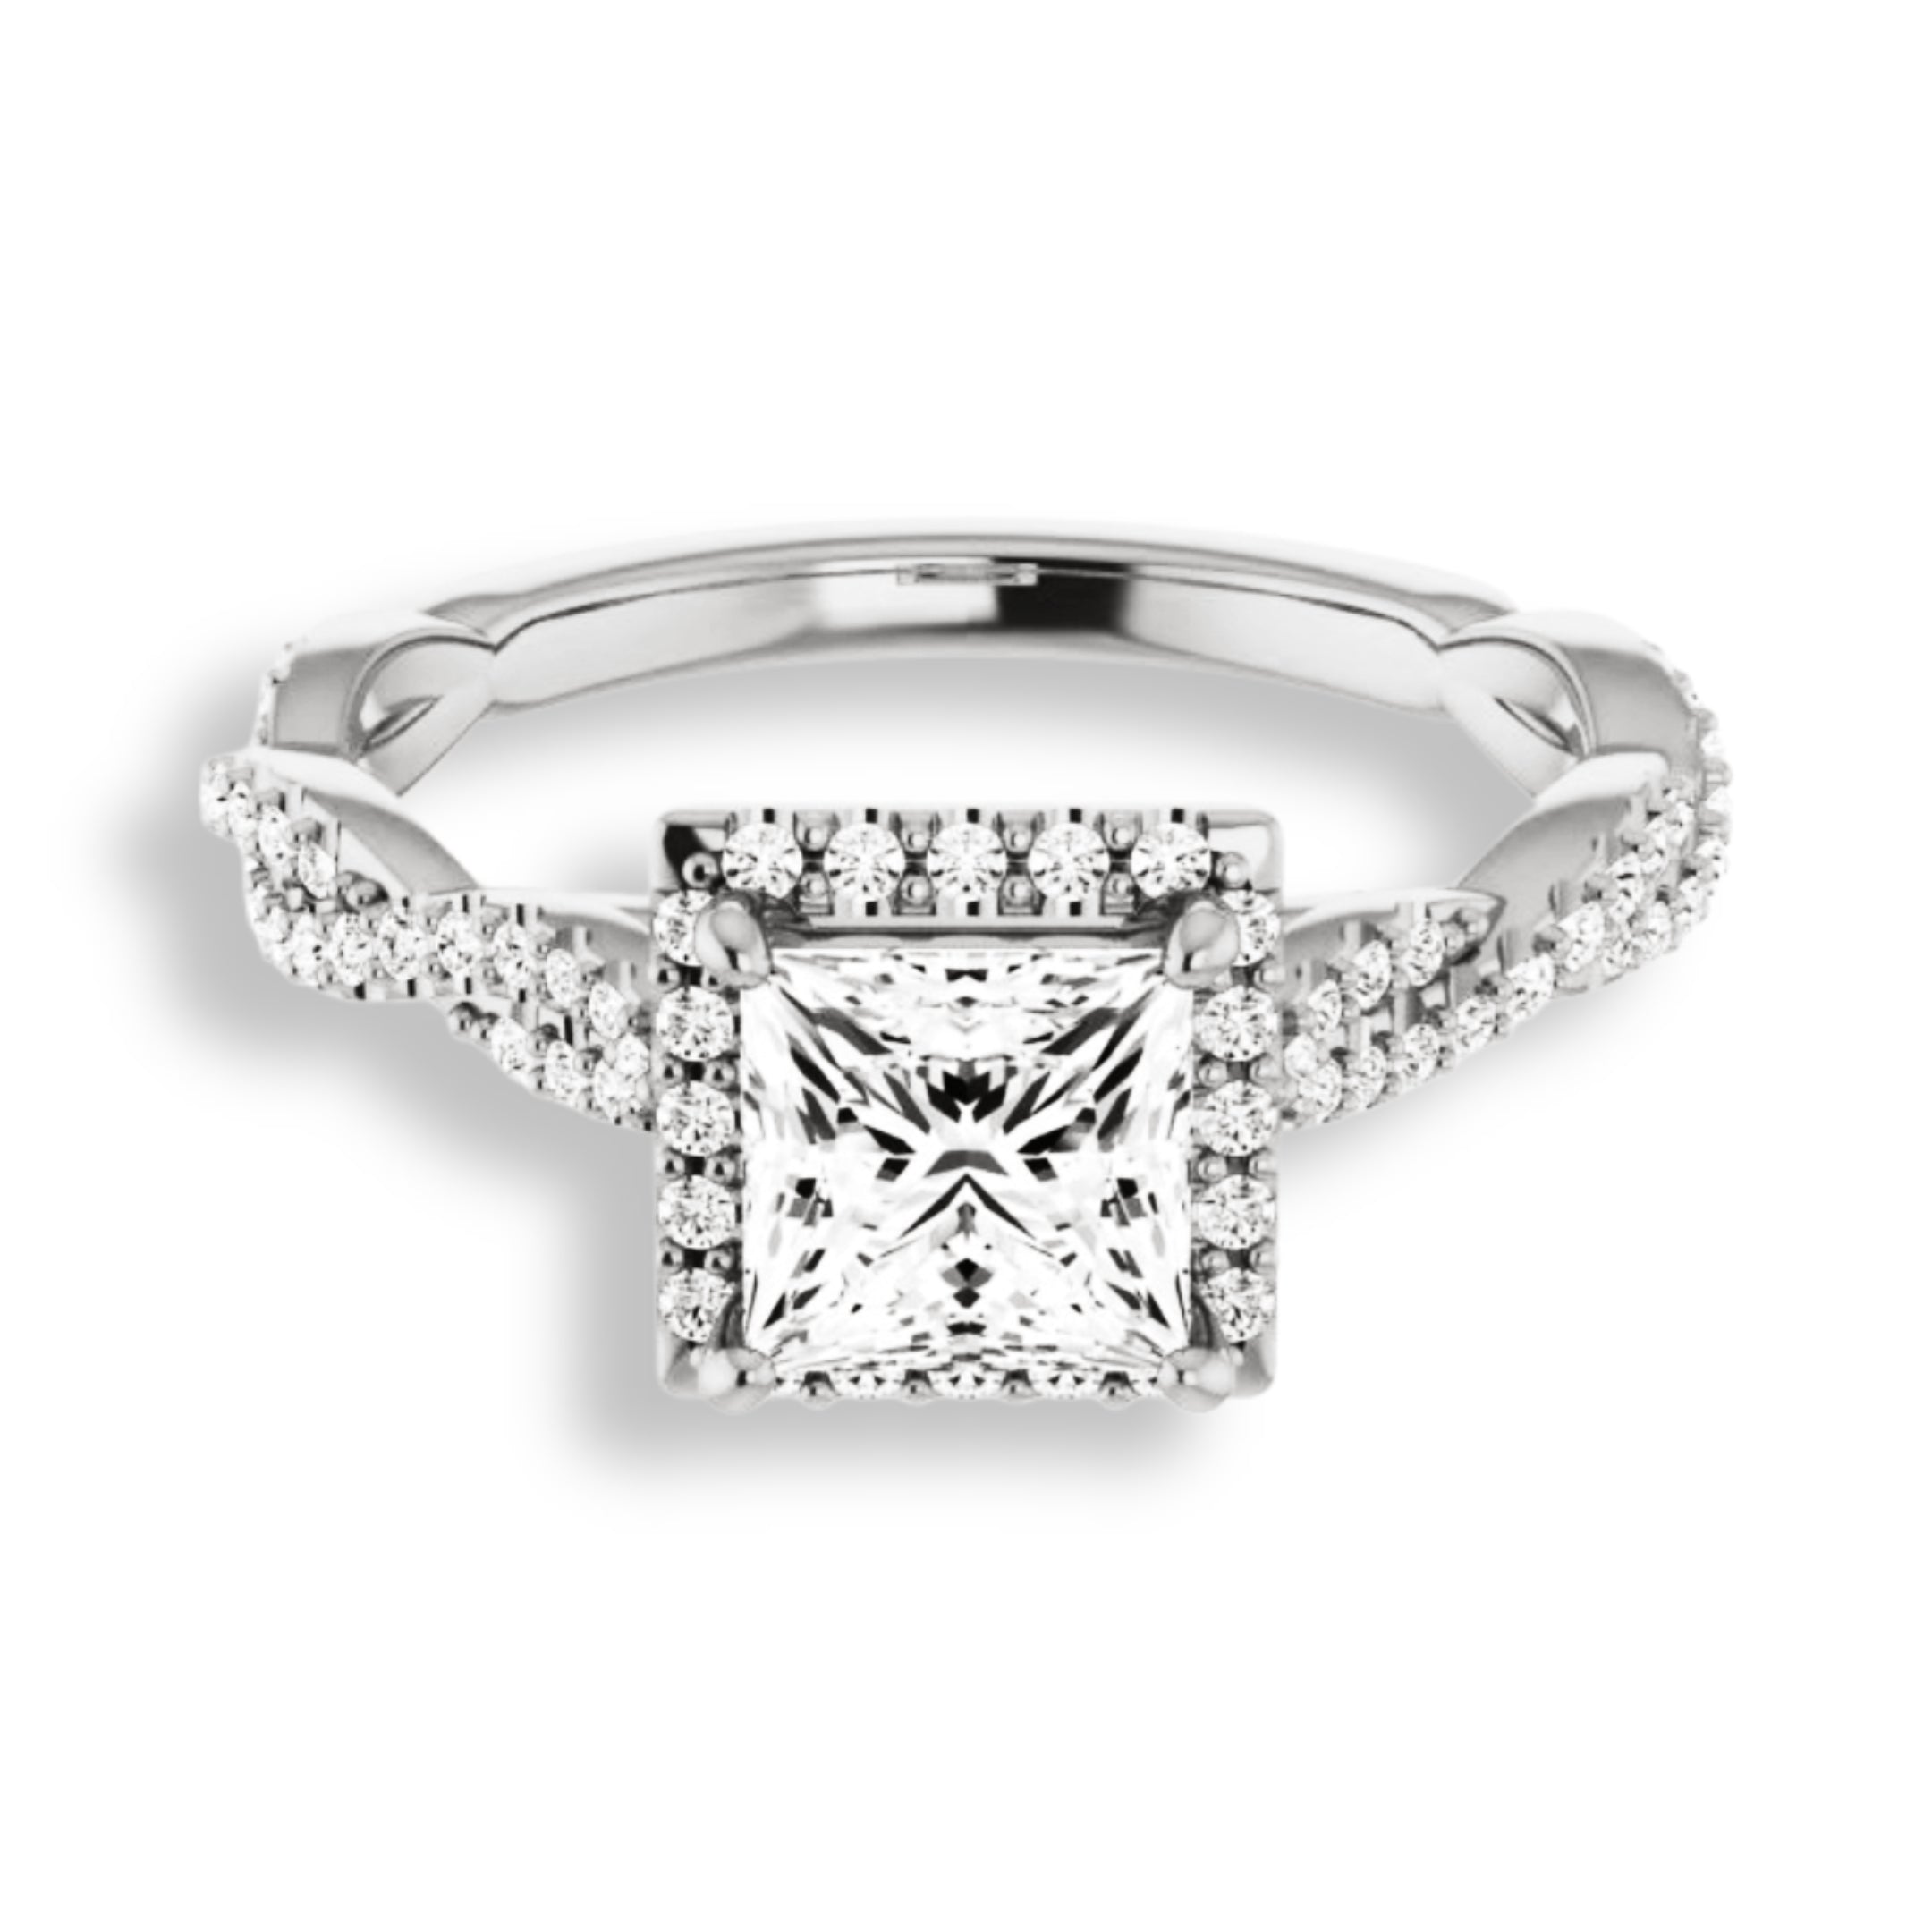 Princess Diamond Halo Engagement Ring With A Twist Band